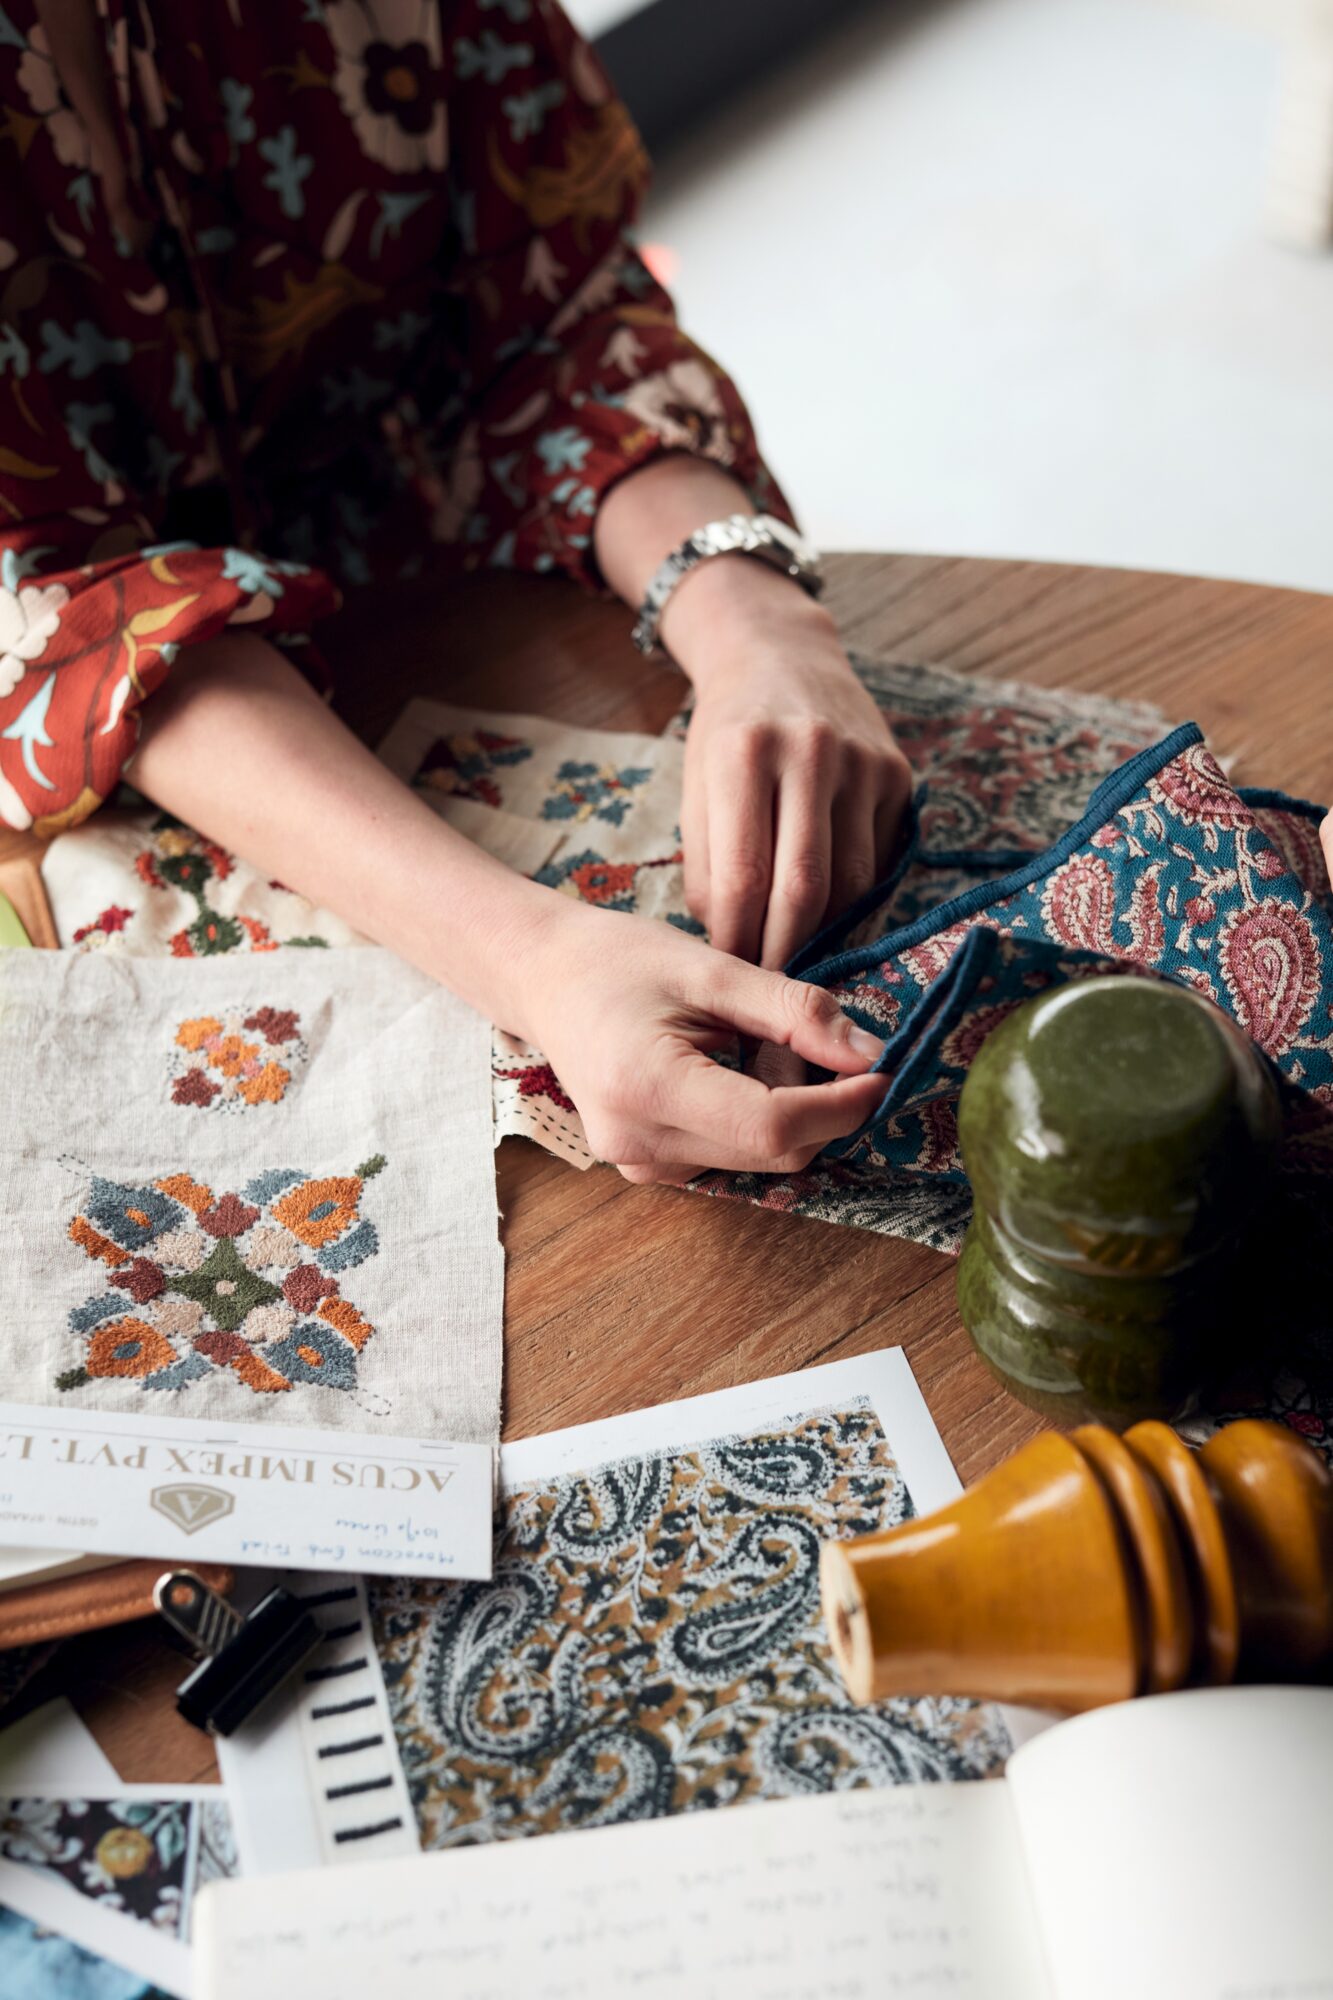 Woman's hands on a table holding fabric and wood samples